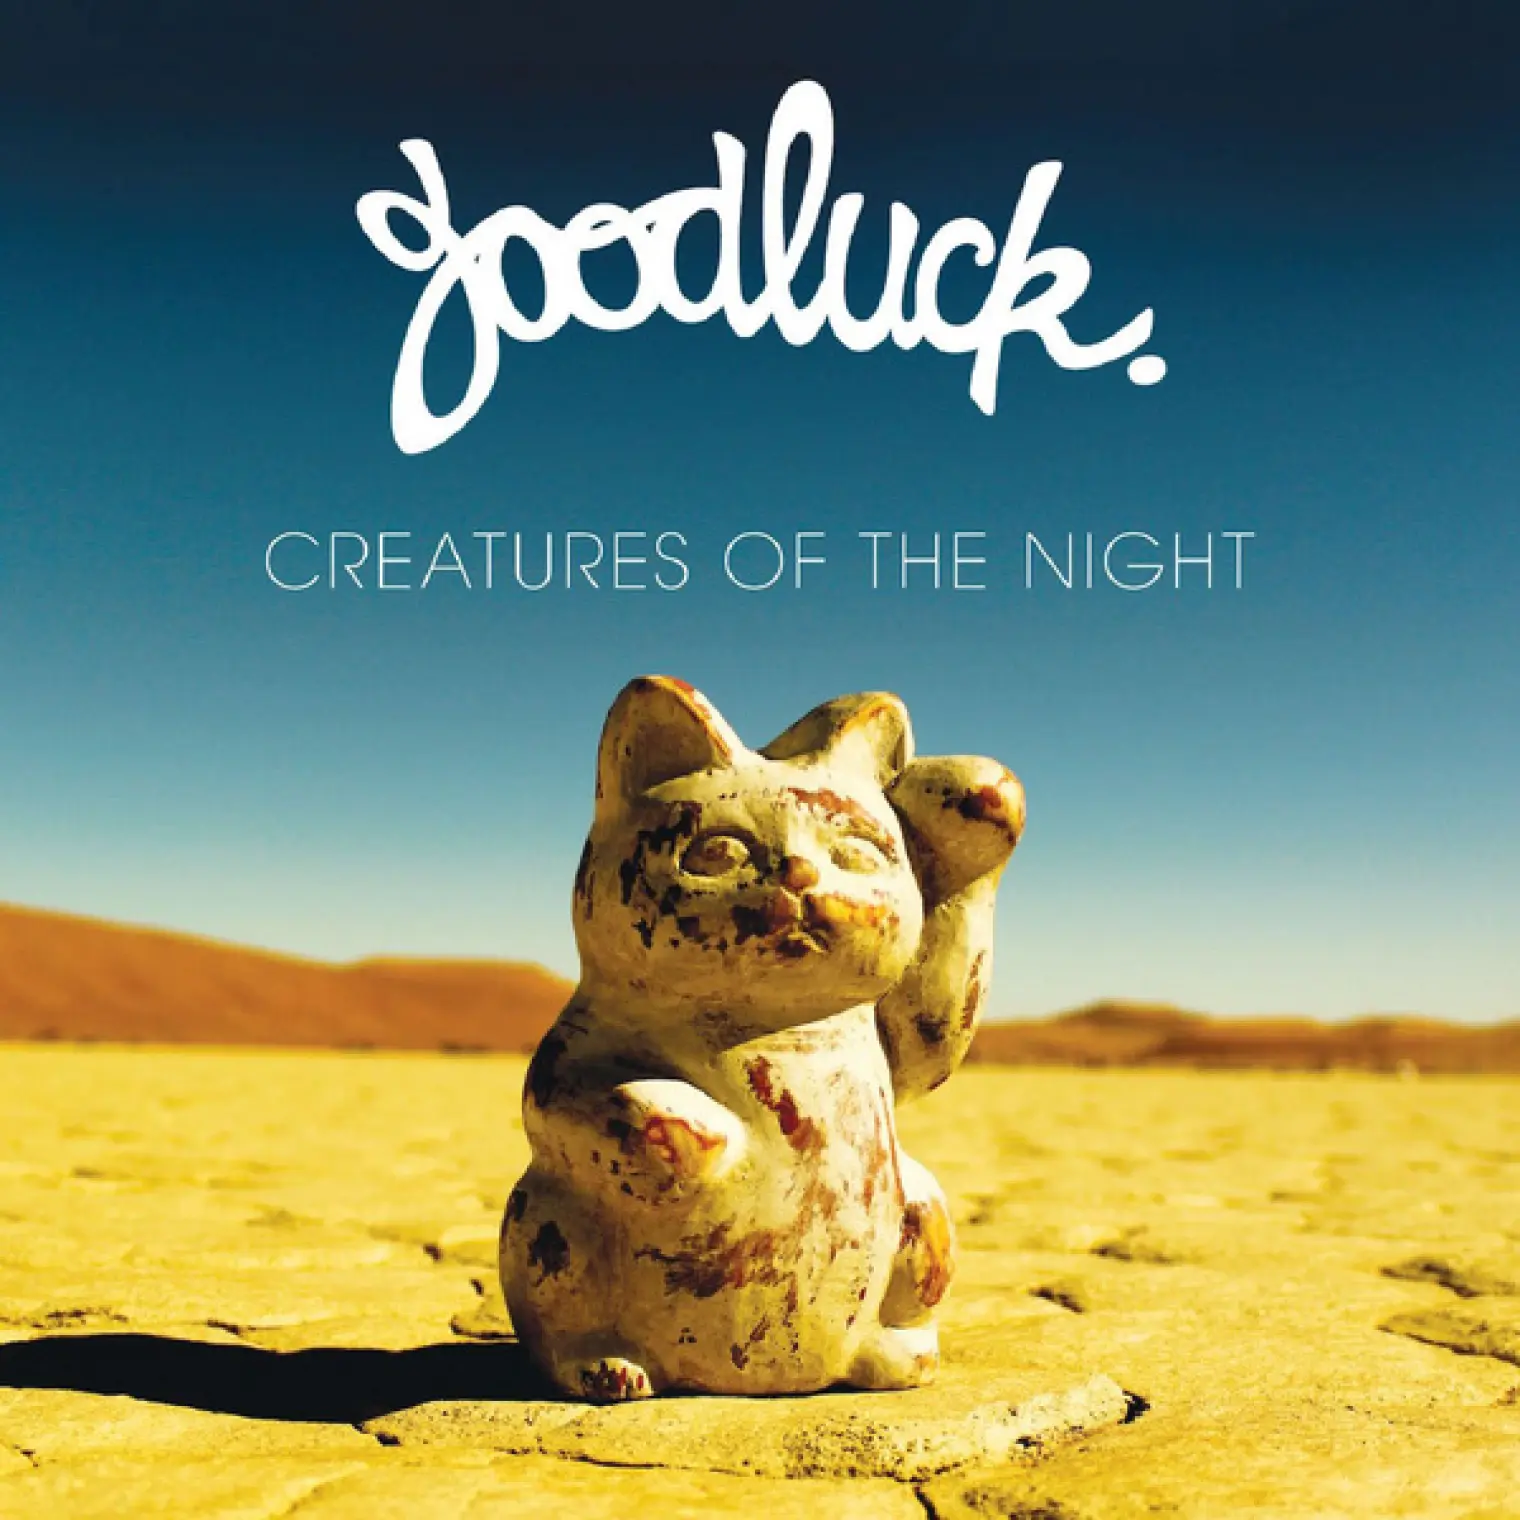 Creatures Of The Night -  Goodluck 